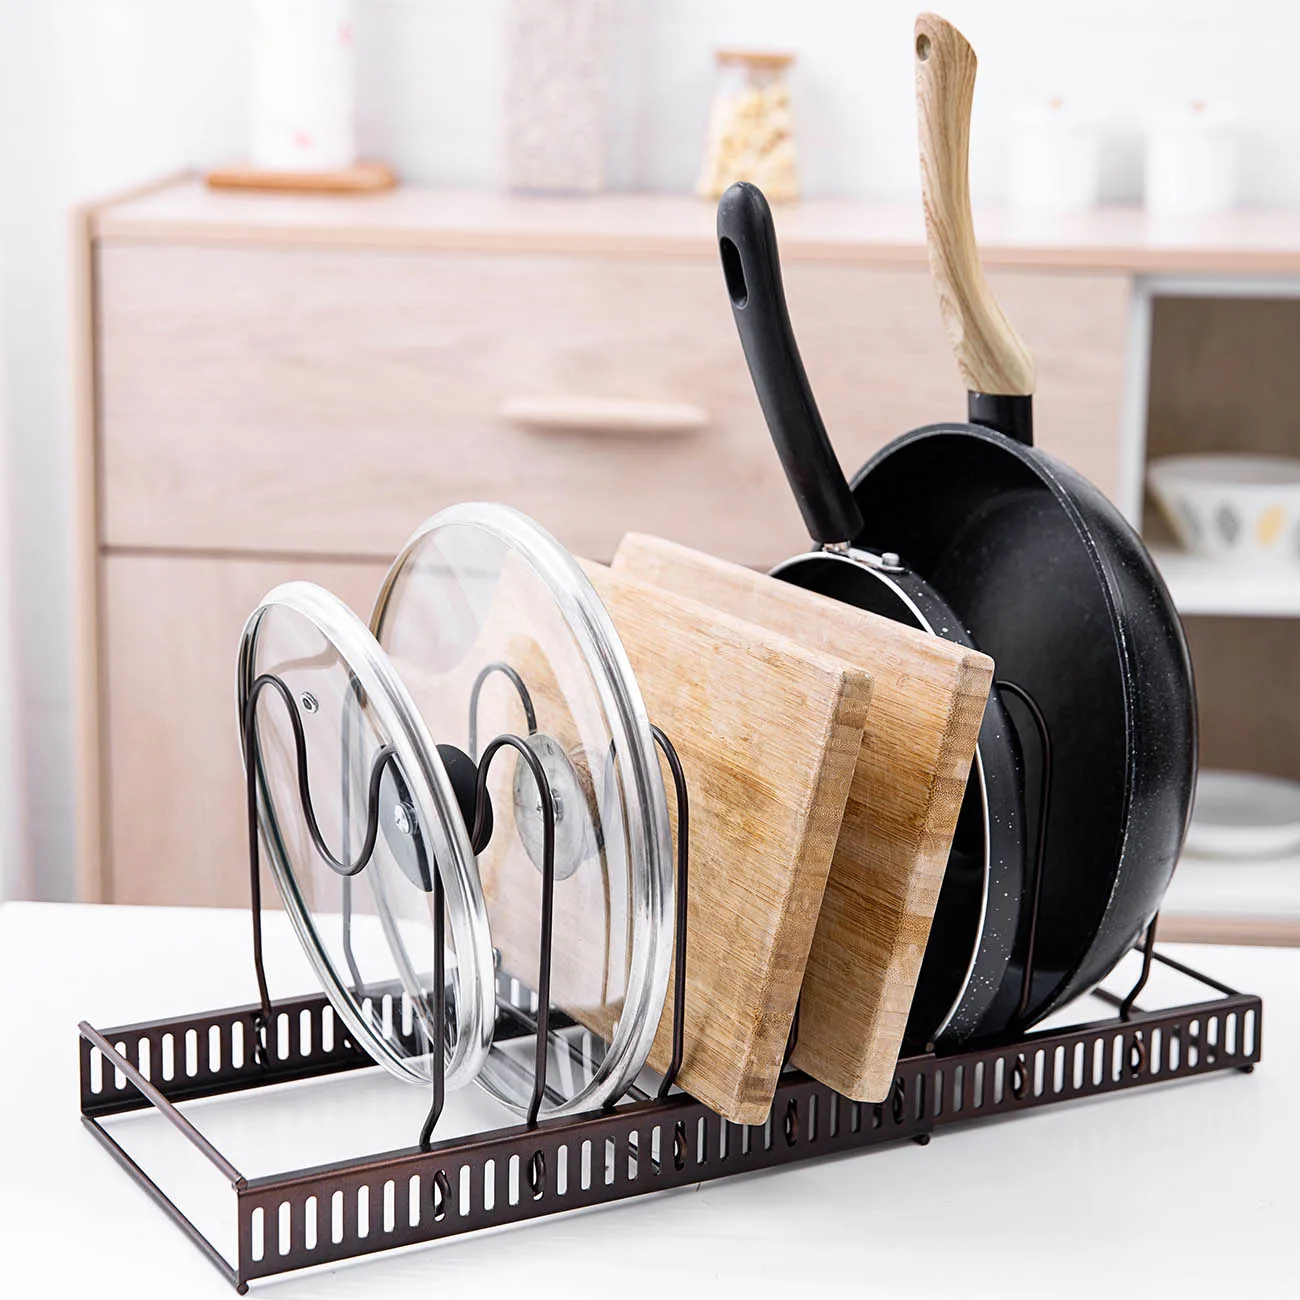 QIFEI Plastic Plate Racks Dish Stand Holder Kitchen Storage Cabinet  Organizer for Dish / Plate / Bowl / Cup / Pot Lid / Cutting Board 